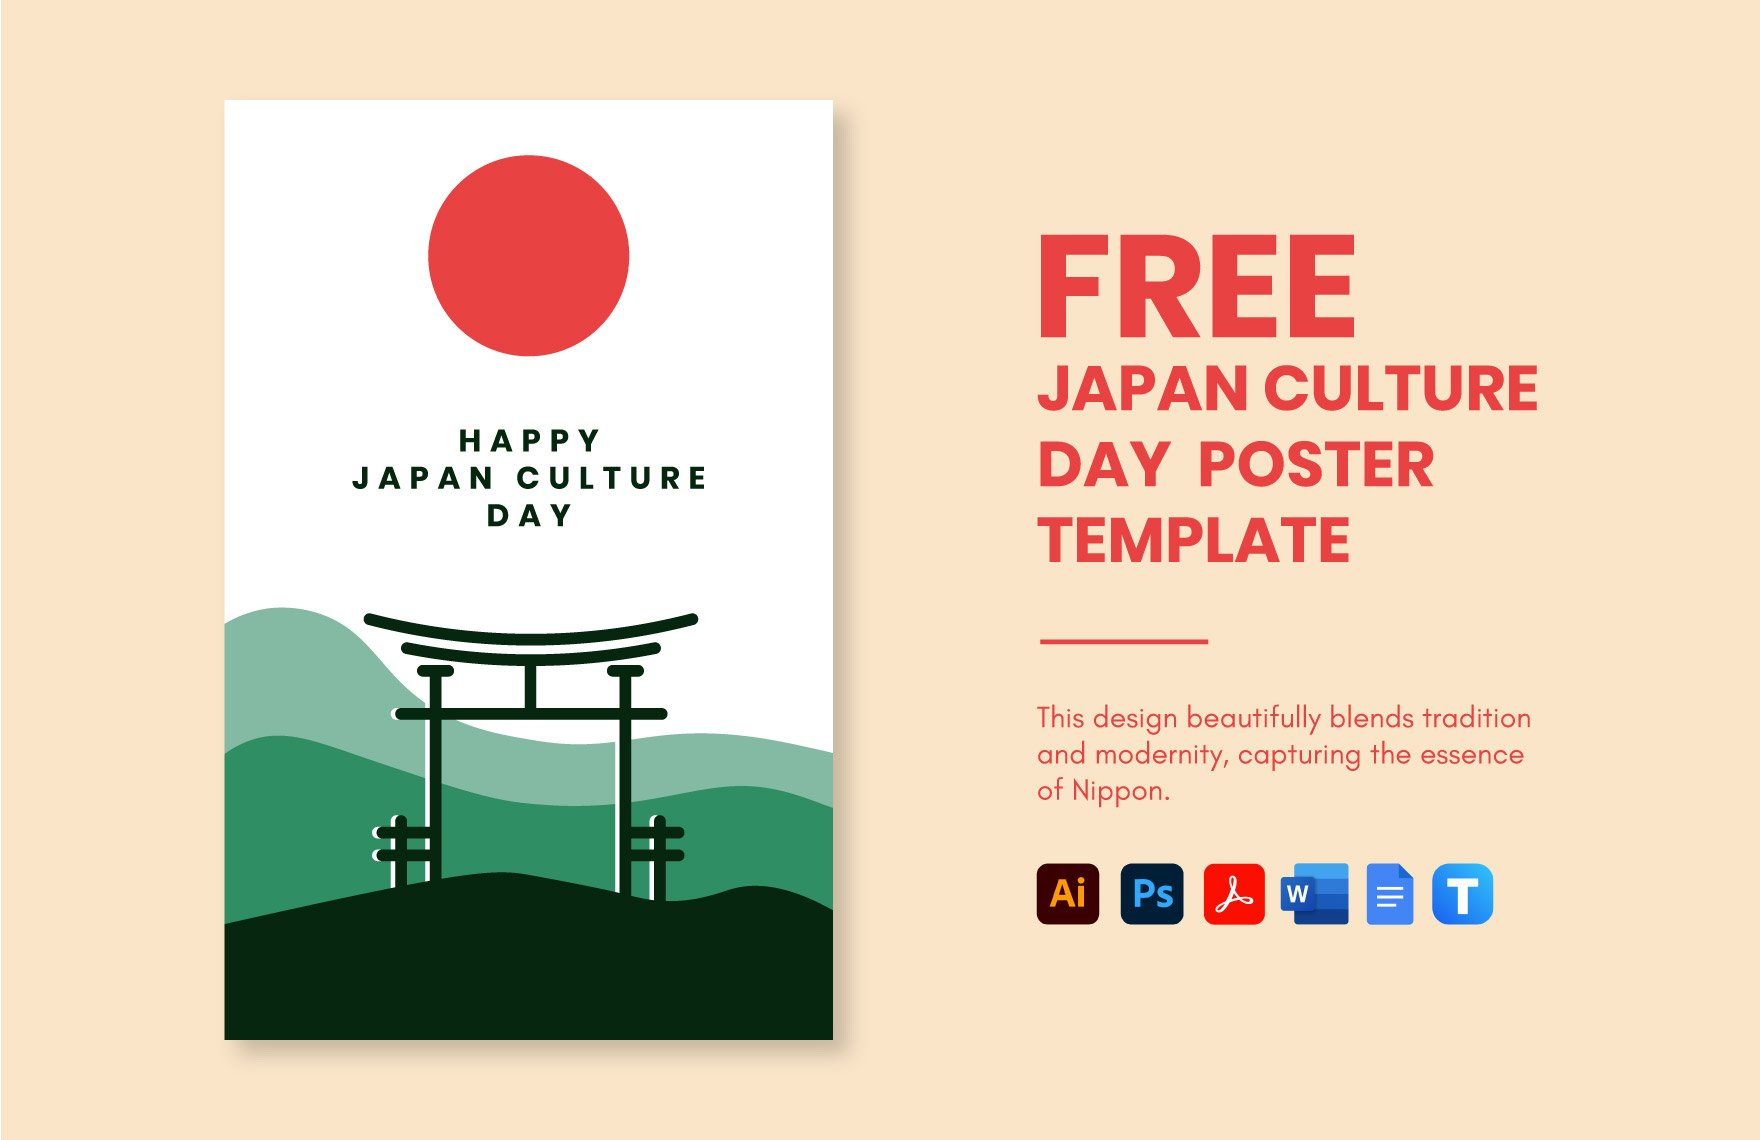 Japan Culture Day Poster Template